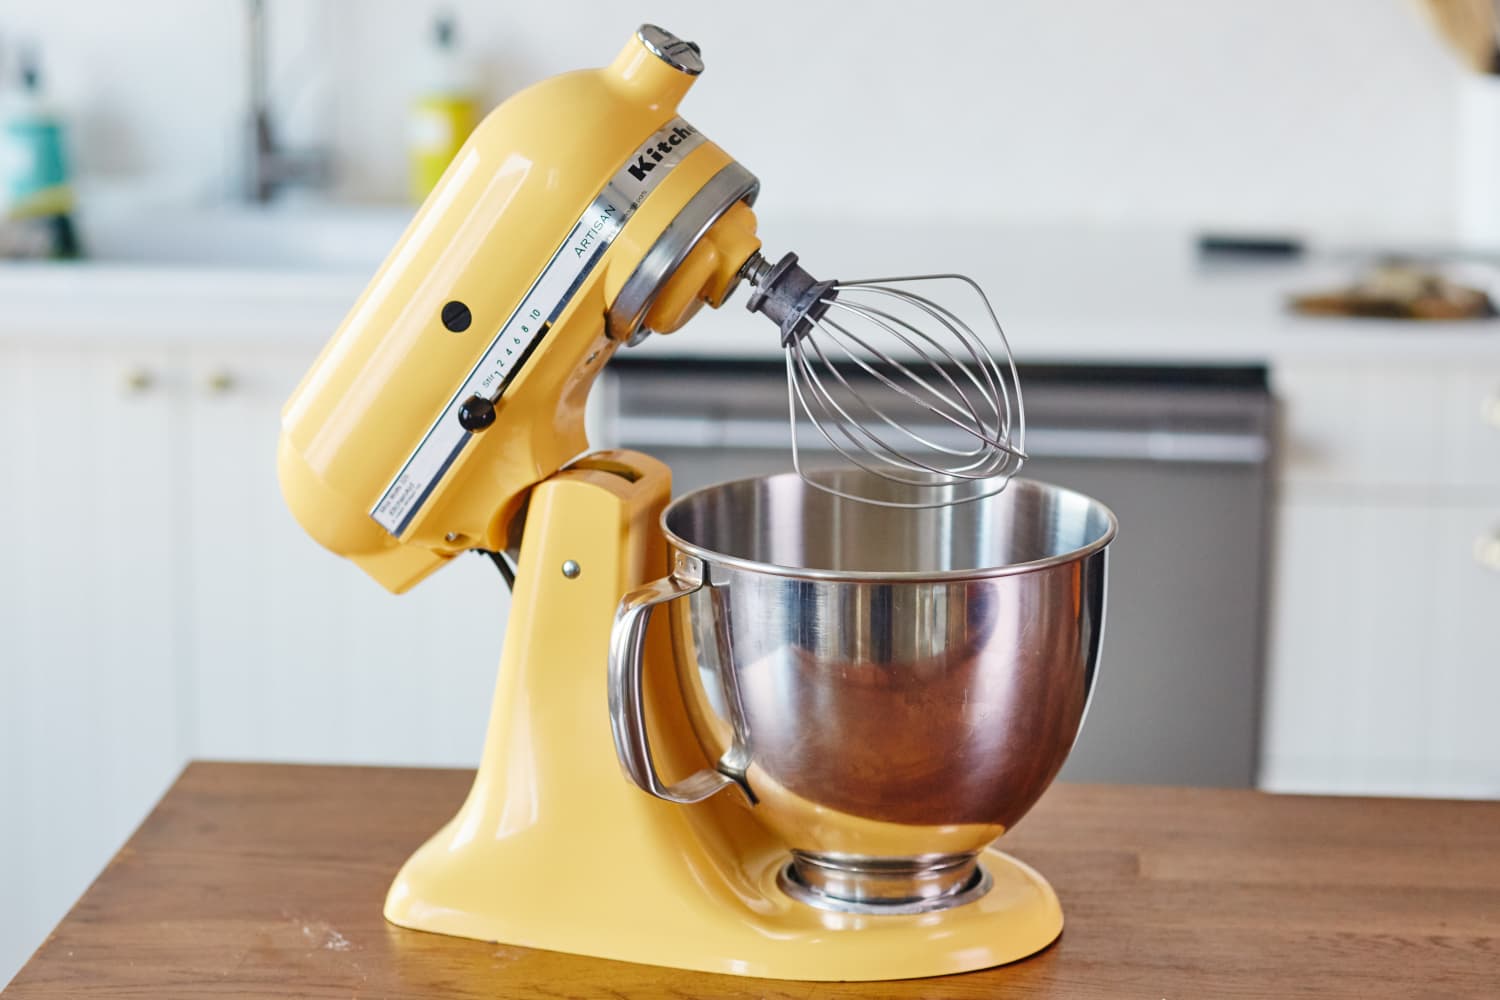 5 Questions to Ask Yourself Before Buying a KitchenAid (or Any Stand Mixer)